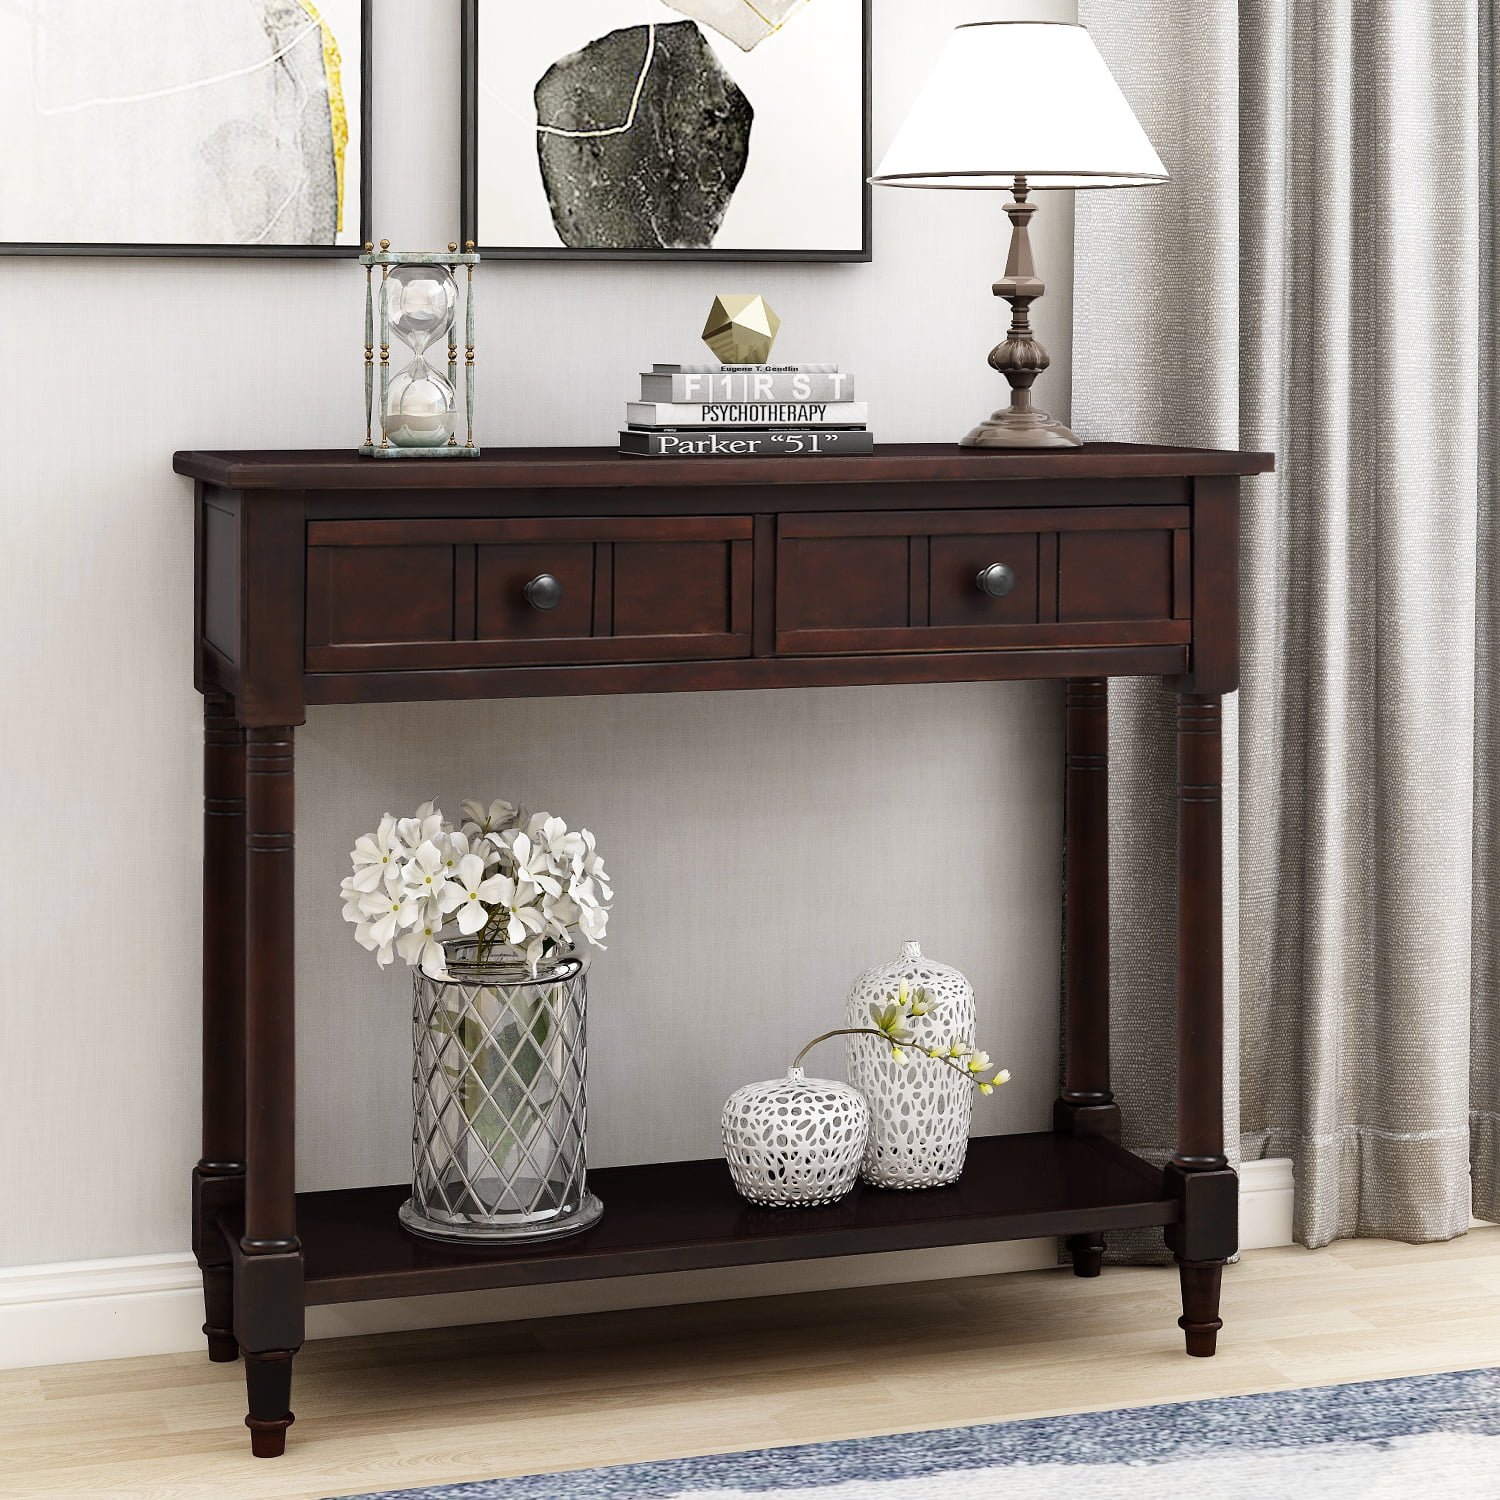 Details about   Entryway Antique Console Table Sideboard w/Drawers Shelf Living Room Furniture 